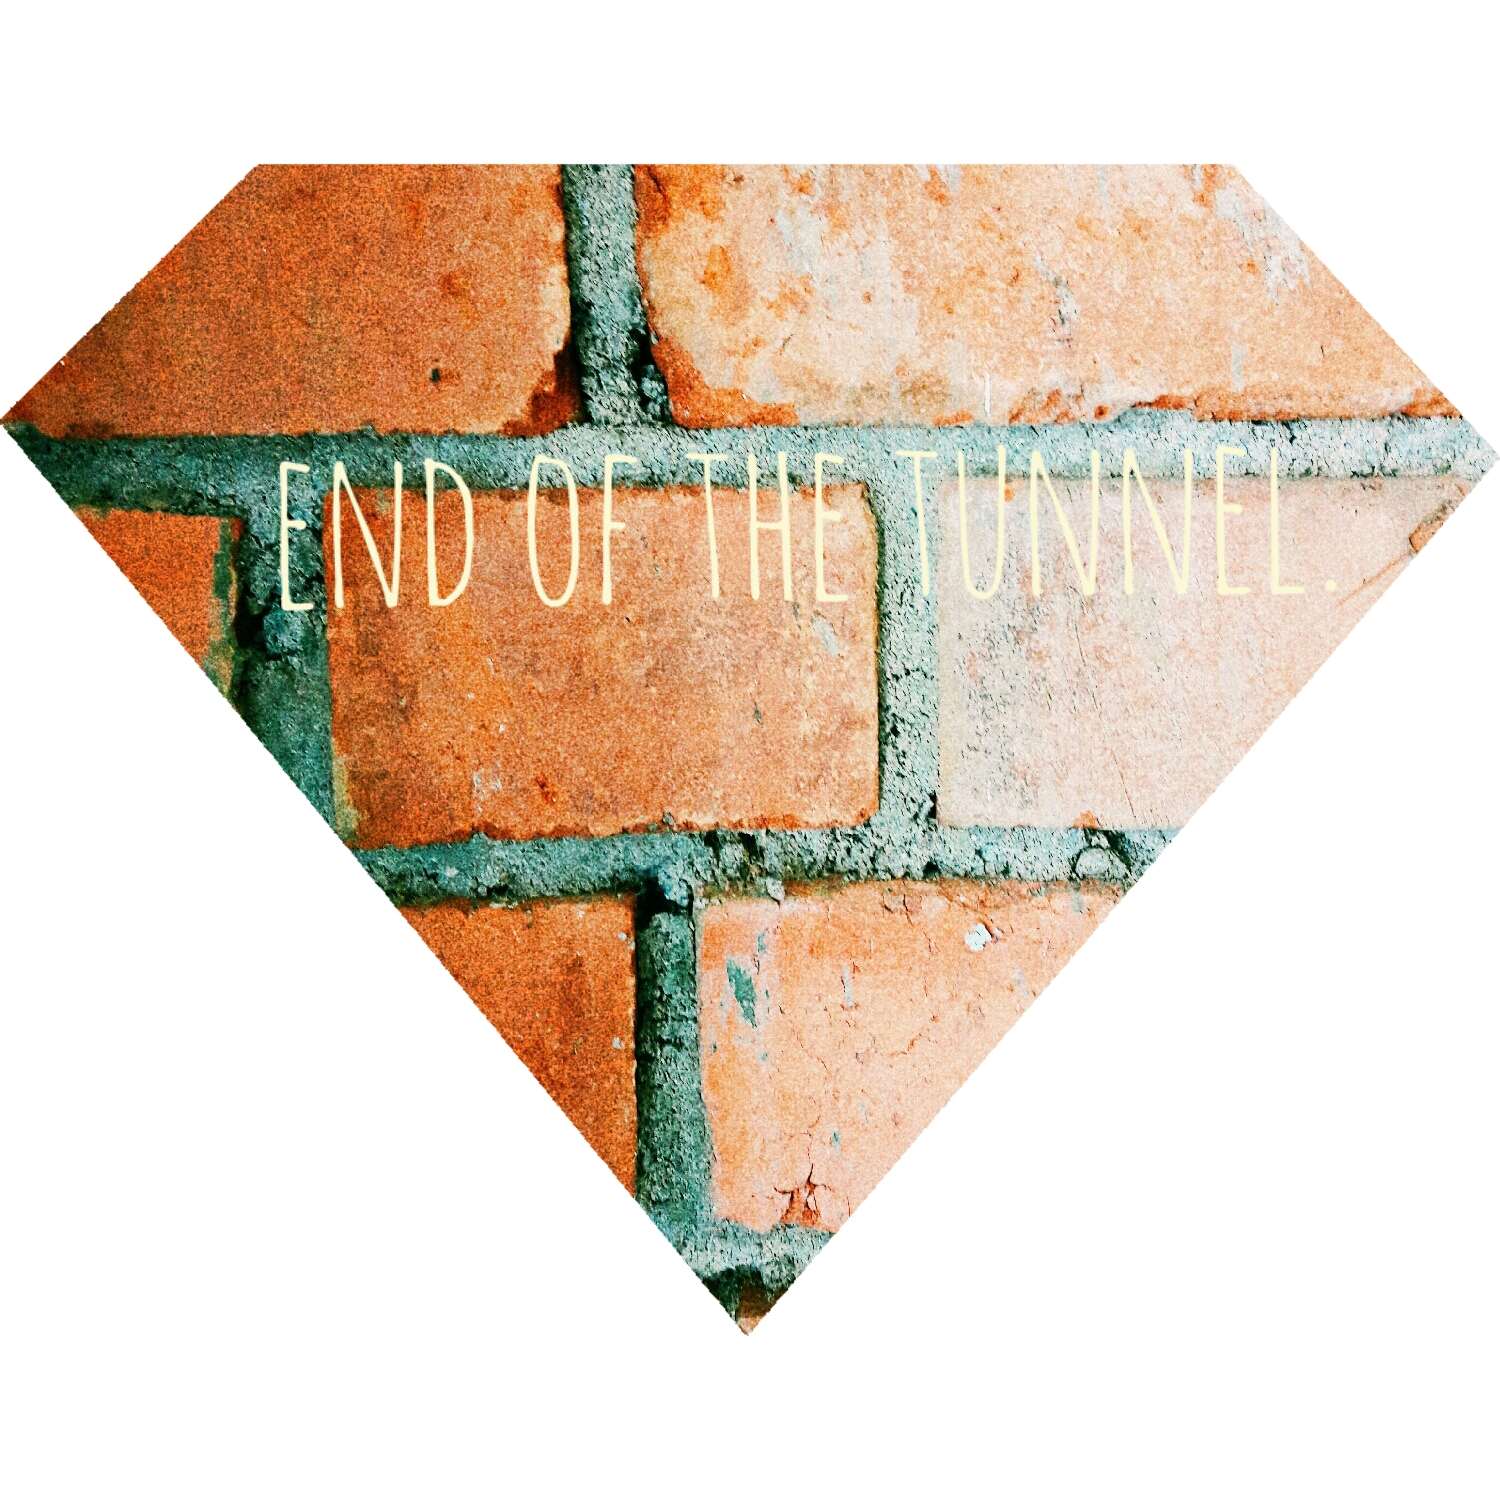 bricks, quotes, vsco wallpaper and background. Free